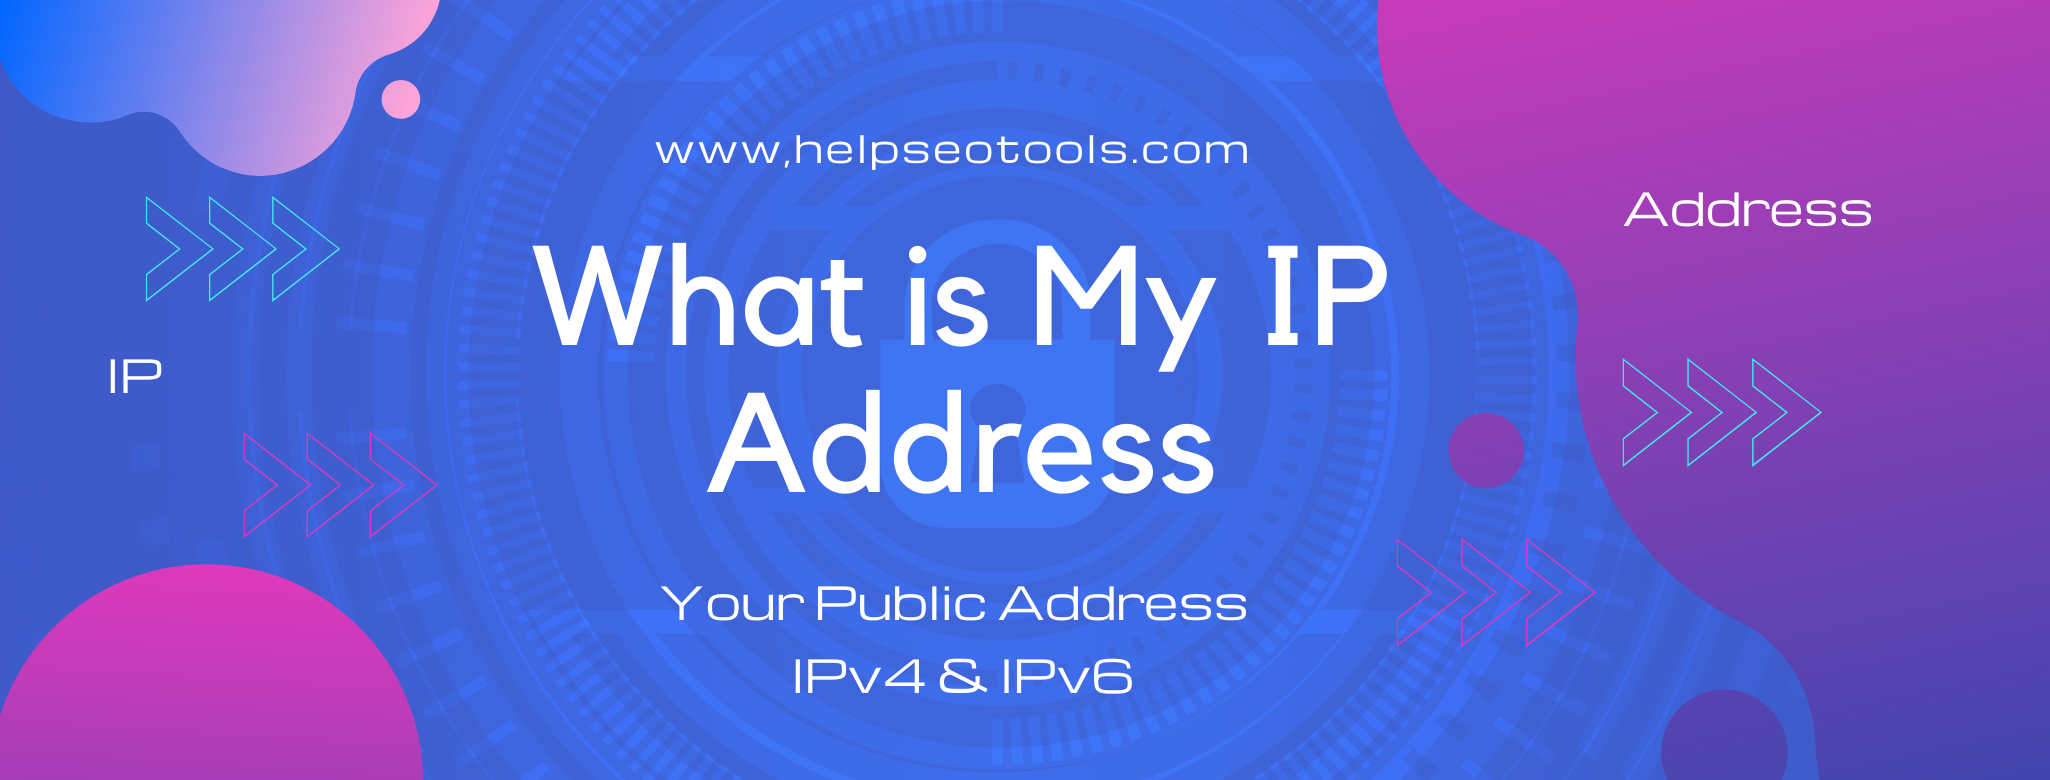 What is my IP Address